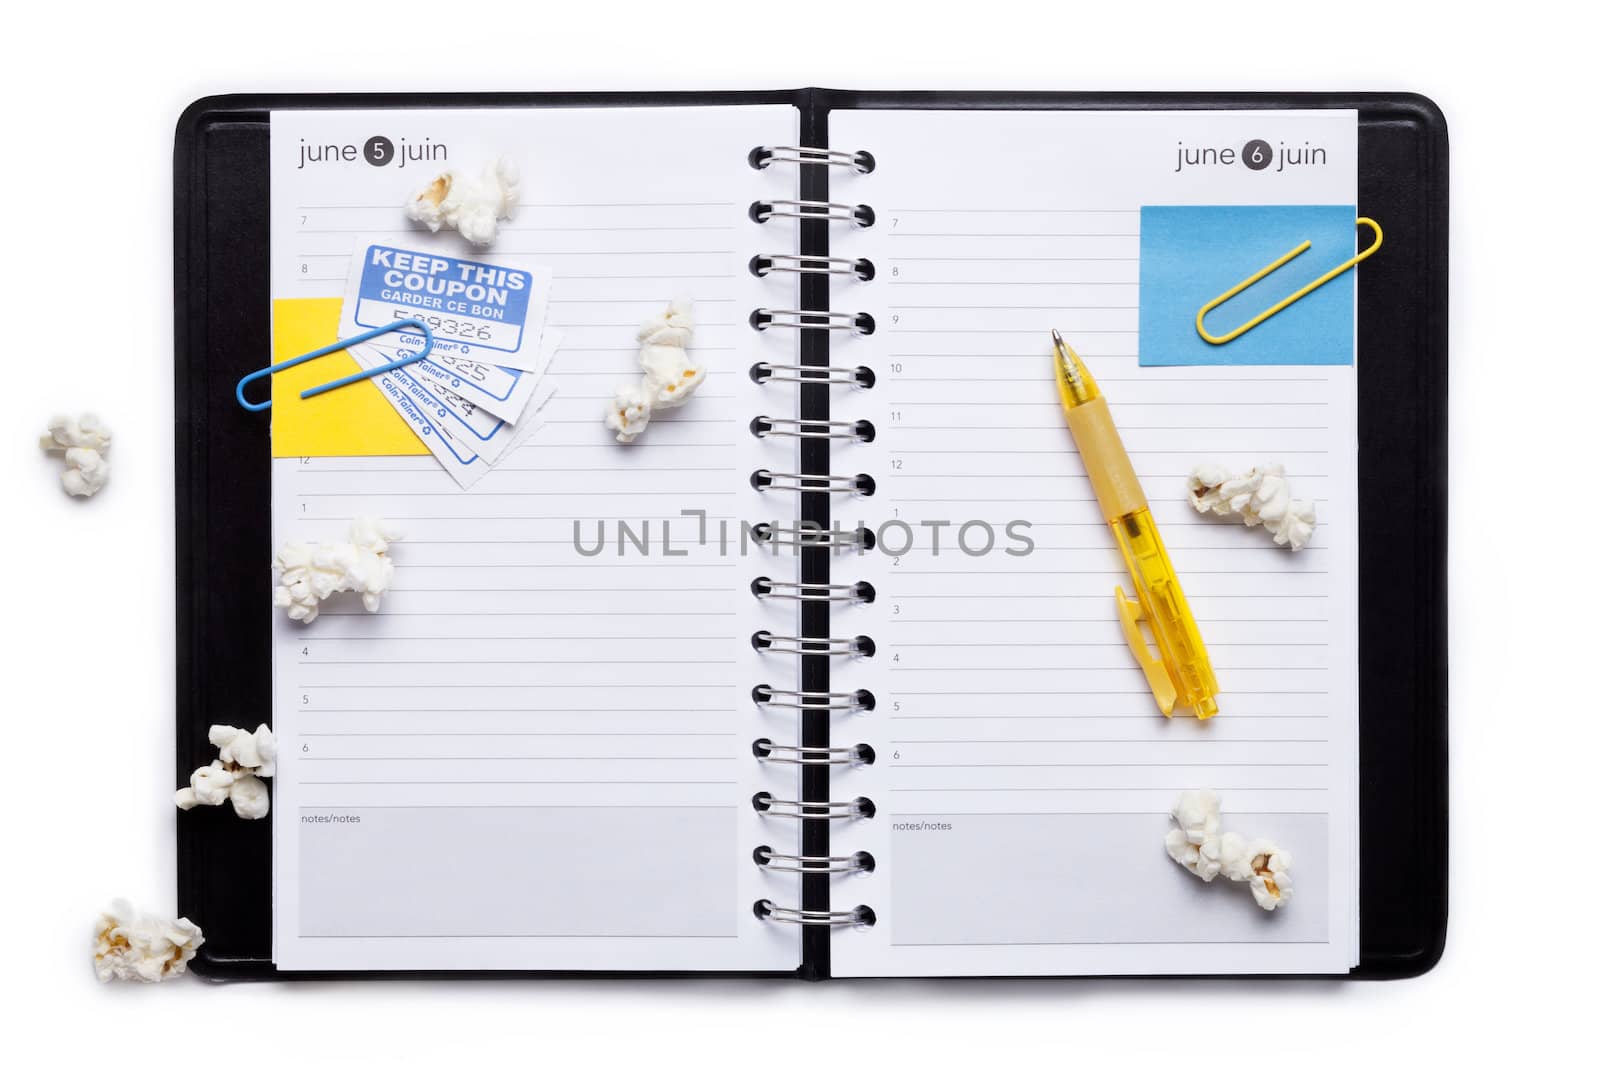 Image of notebook organizer with paper clips, pop corn, ball pen against white background